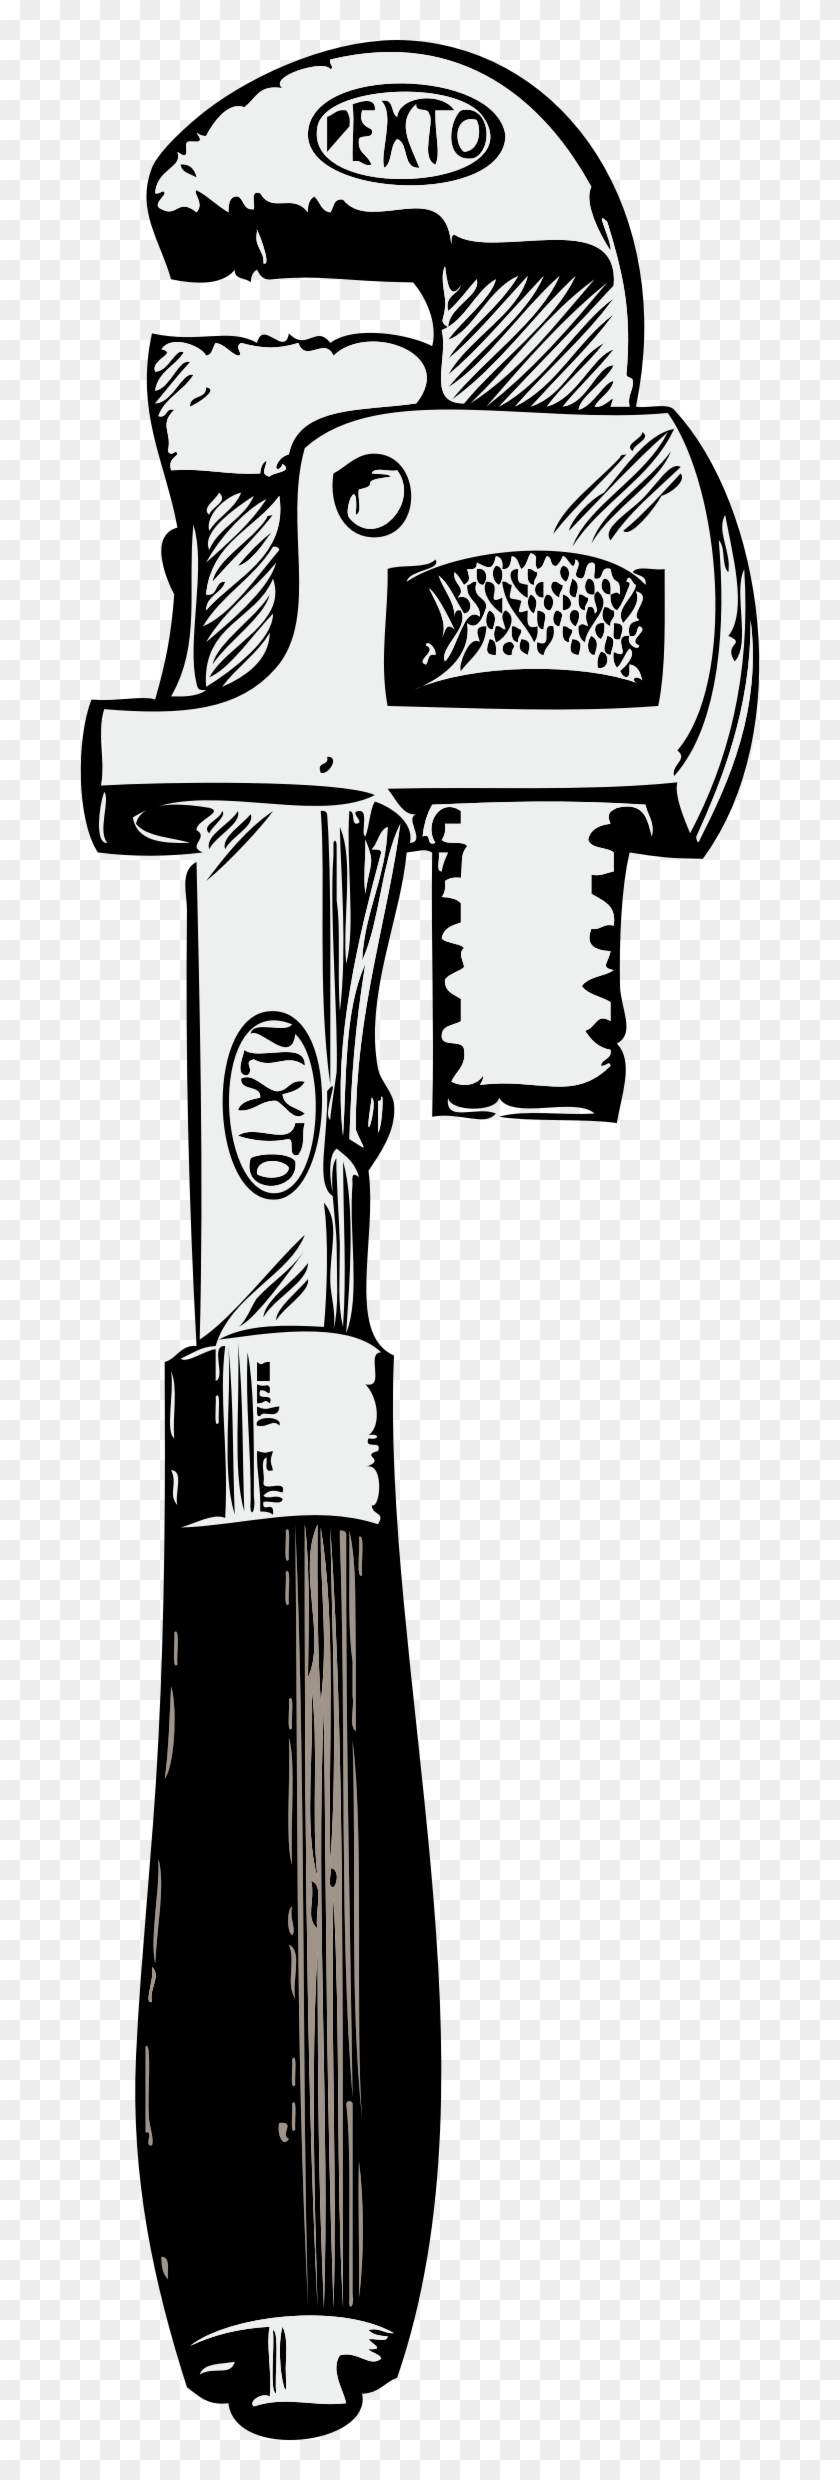 Big Image Png - Pipe Wrench Clipart Transparent Png #1217058